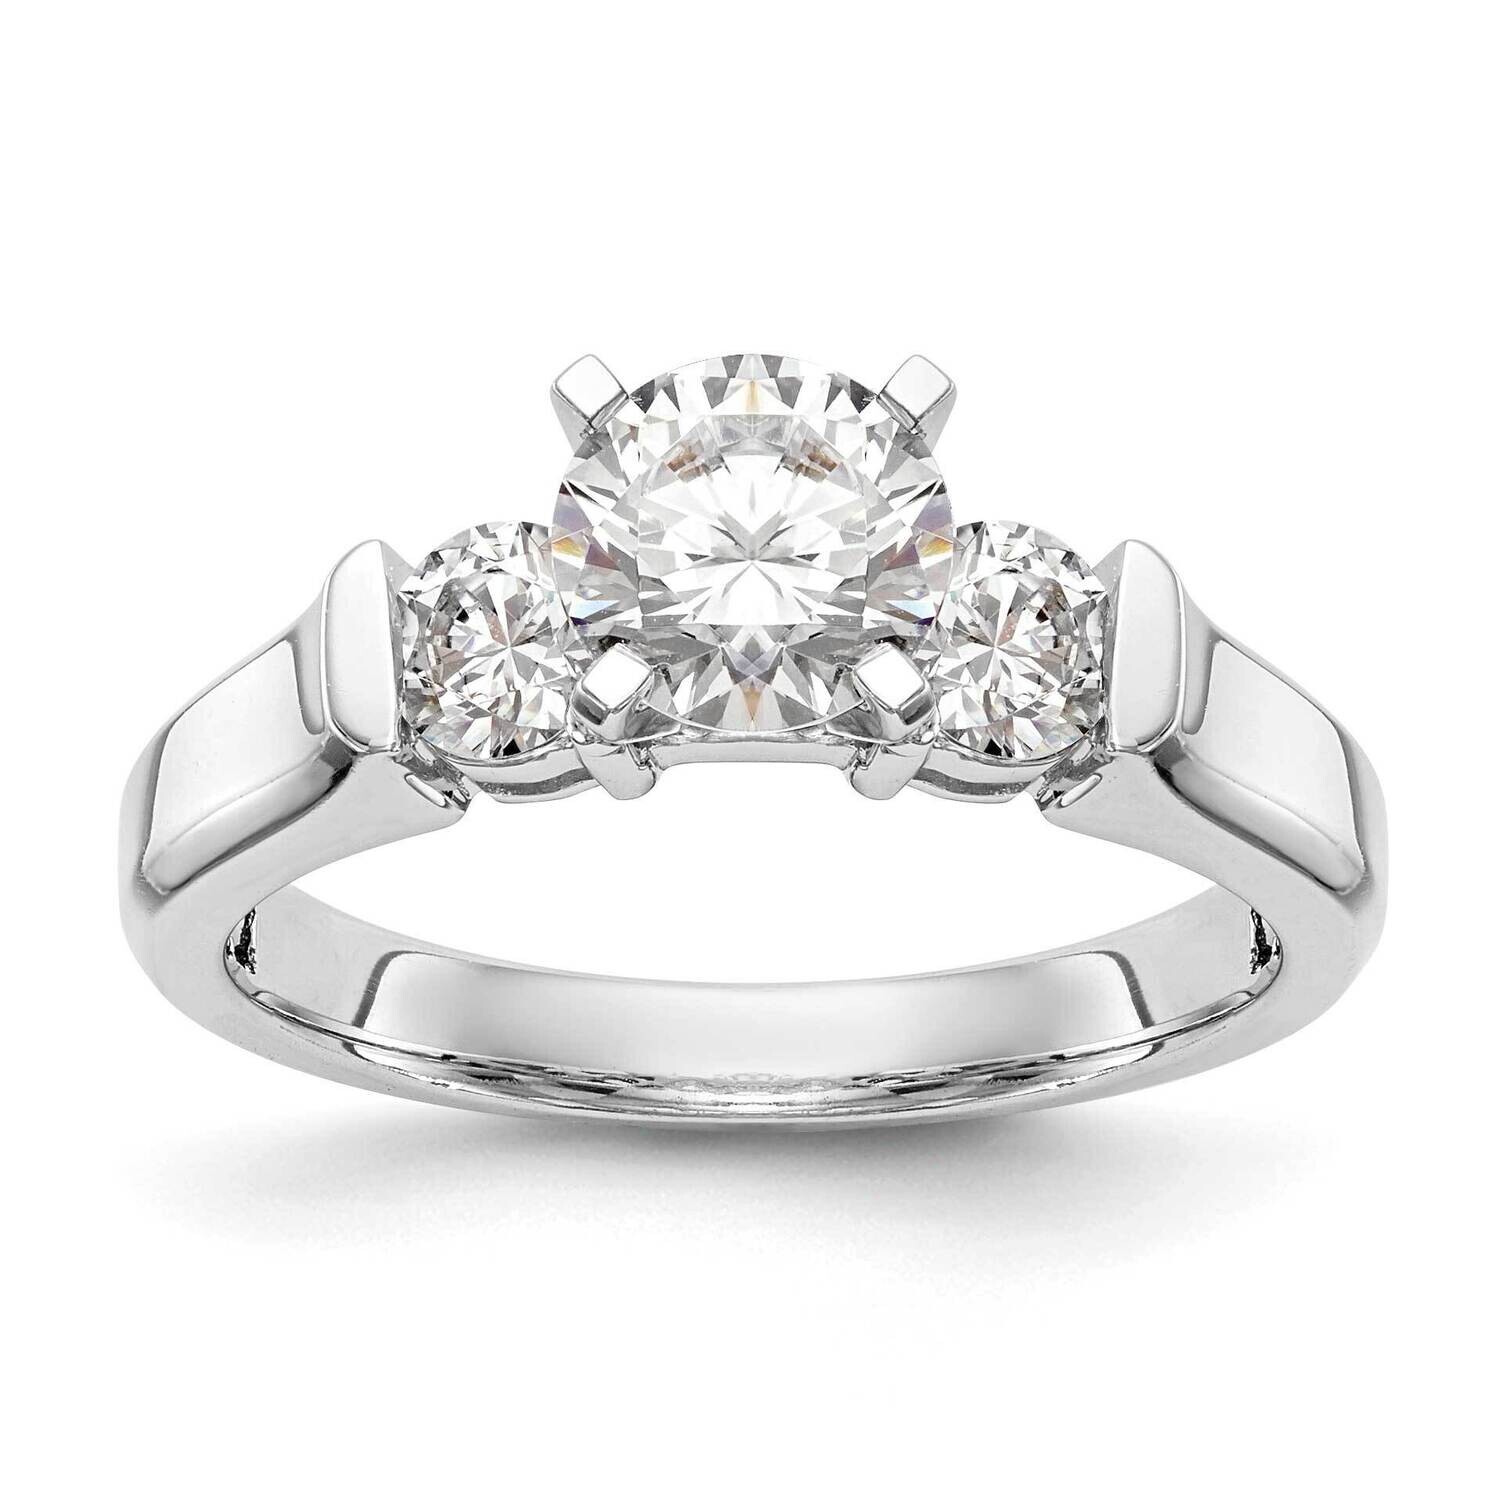 3-Stone Holds 1 Carat 6.5mm Round Center 2-4.1mm Round Sides Engagement Ring Mounting 14k White Gold RM2961E-100_050-CWAA